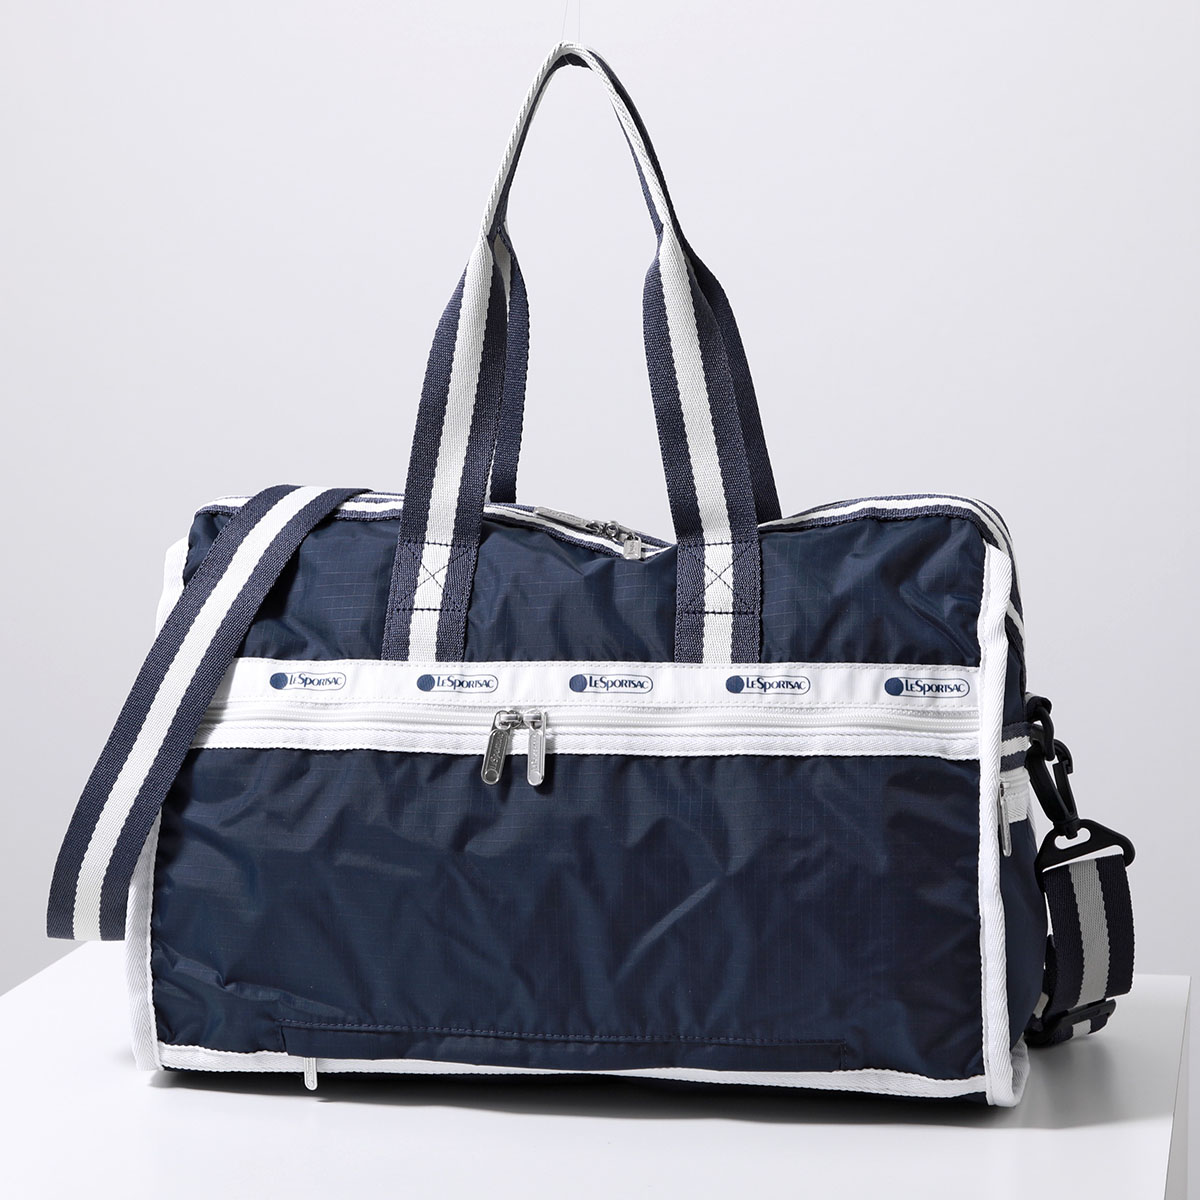 LeSportsac レスポートサック ボストンバッグ DELUXE MED WEEKENDER C...